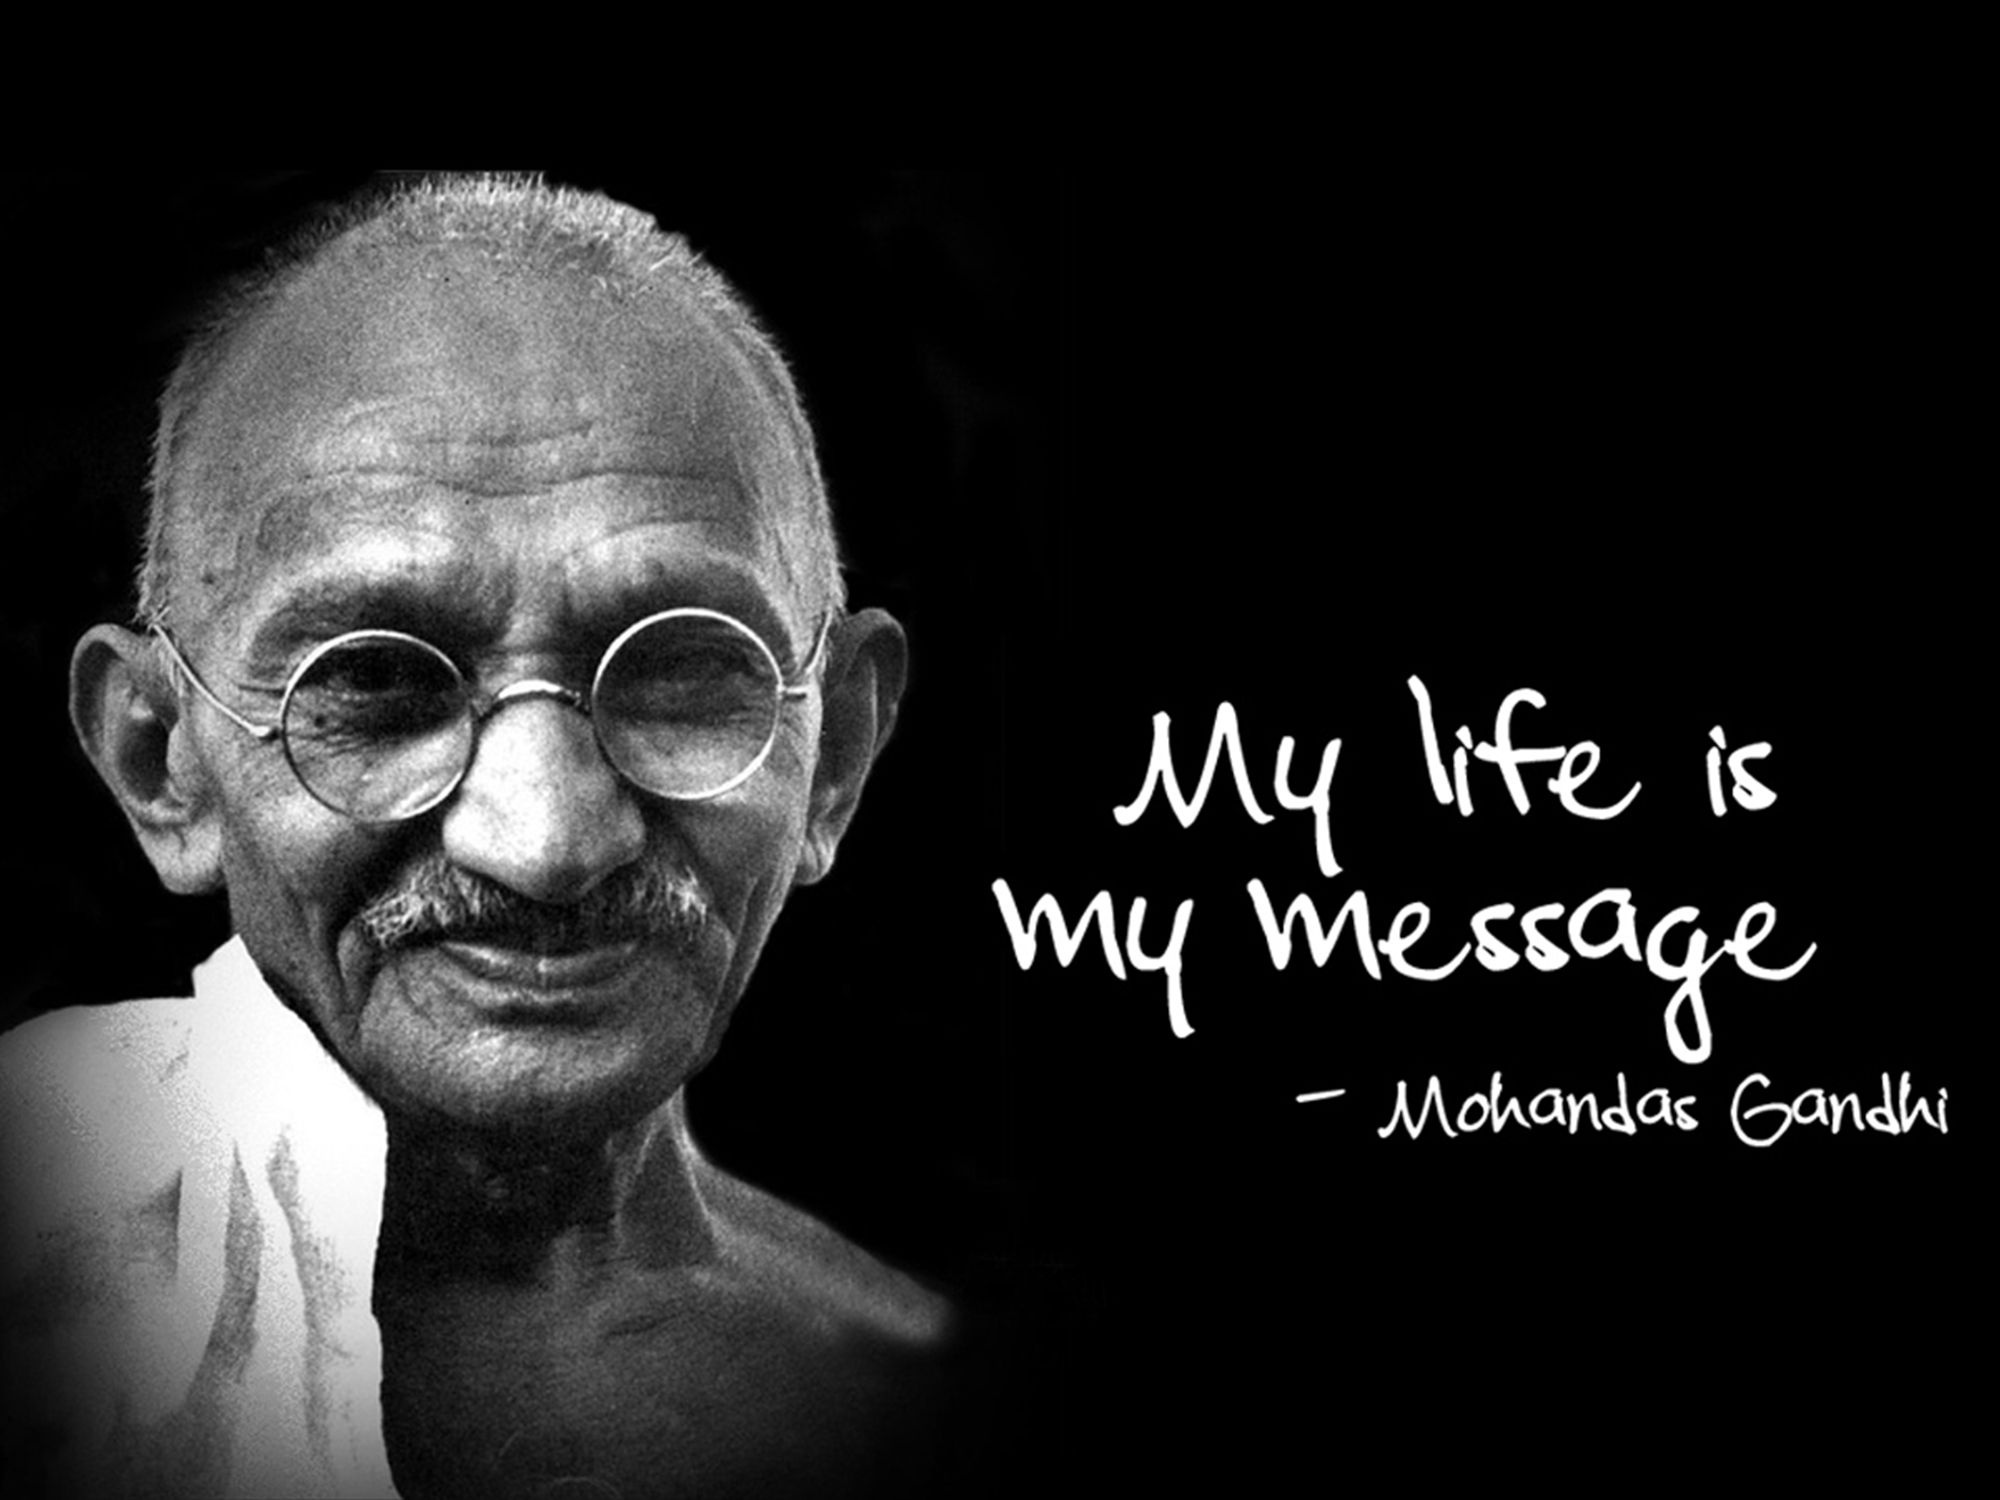 Mahatma Gandhi wallpapers, Symbol of peace, Indian freedom fighter, Legacy of non-violence, 2000x1500 HD Desktop